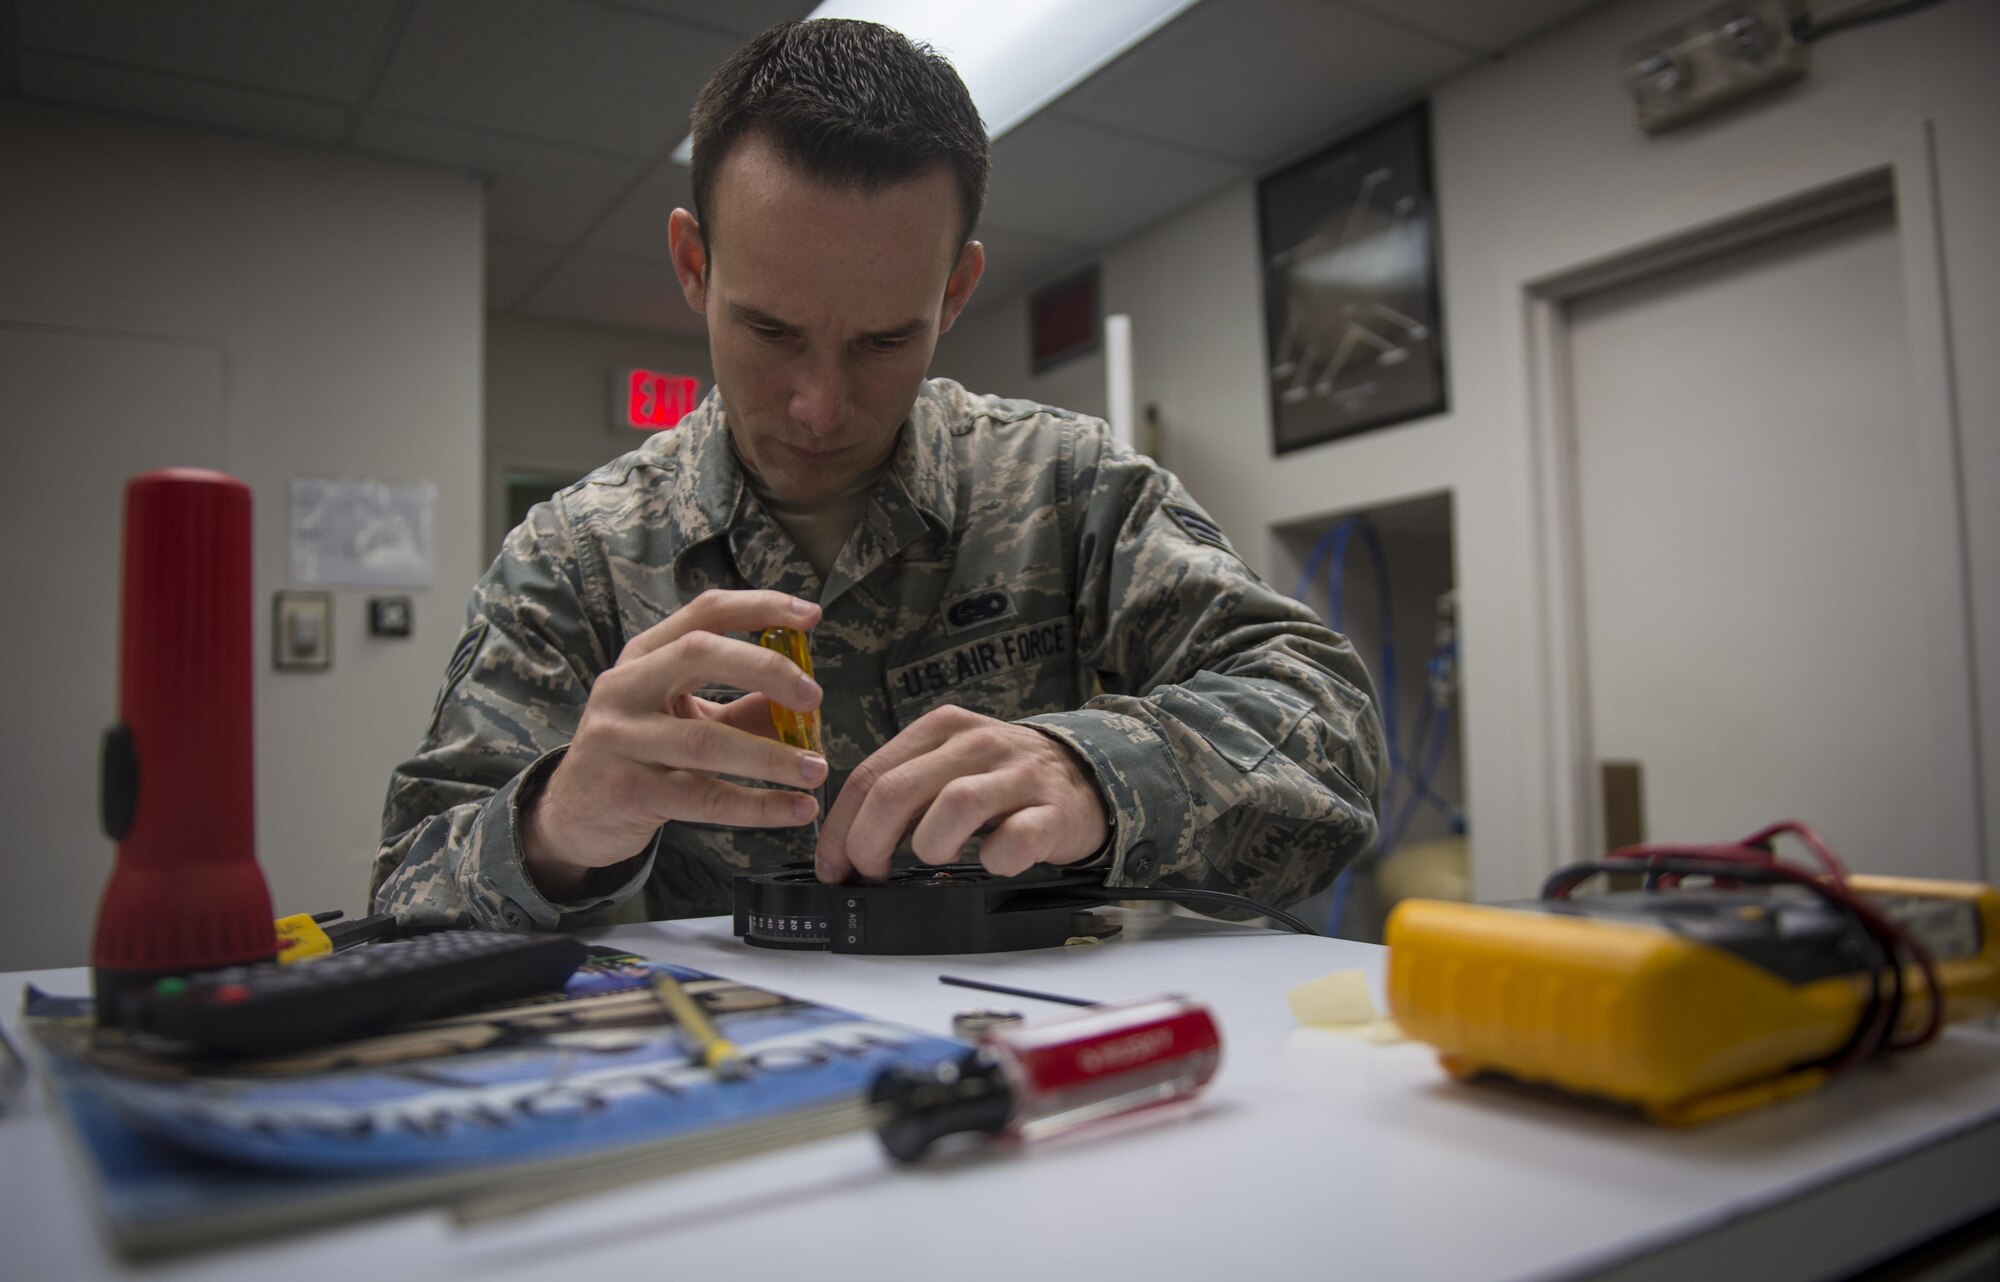 Senior Airman Samuel Davis, an airfield systems maintenance apprentice with Detachment 2, 2nd Weather Squadron, repairs the solar telescope’s polaroid servo for the automatic gain control at the Holloman Solar Observatory on Holloman Air Force Base, N.M., Sept. 24, 2015. Davis is a depot-level maintenance technician who makes repairs on the three solar observatory telescopes around the world, the other two being in Learmonth, Australia and San Vito, Italy. (U.S. Air Force photo/Senior Airman Aaron Montoya)